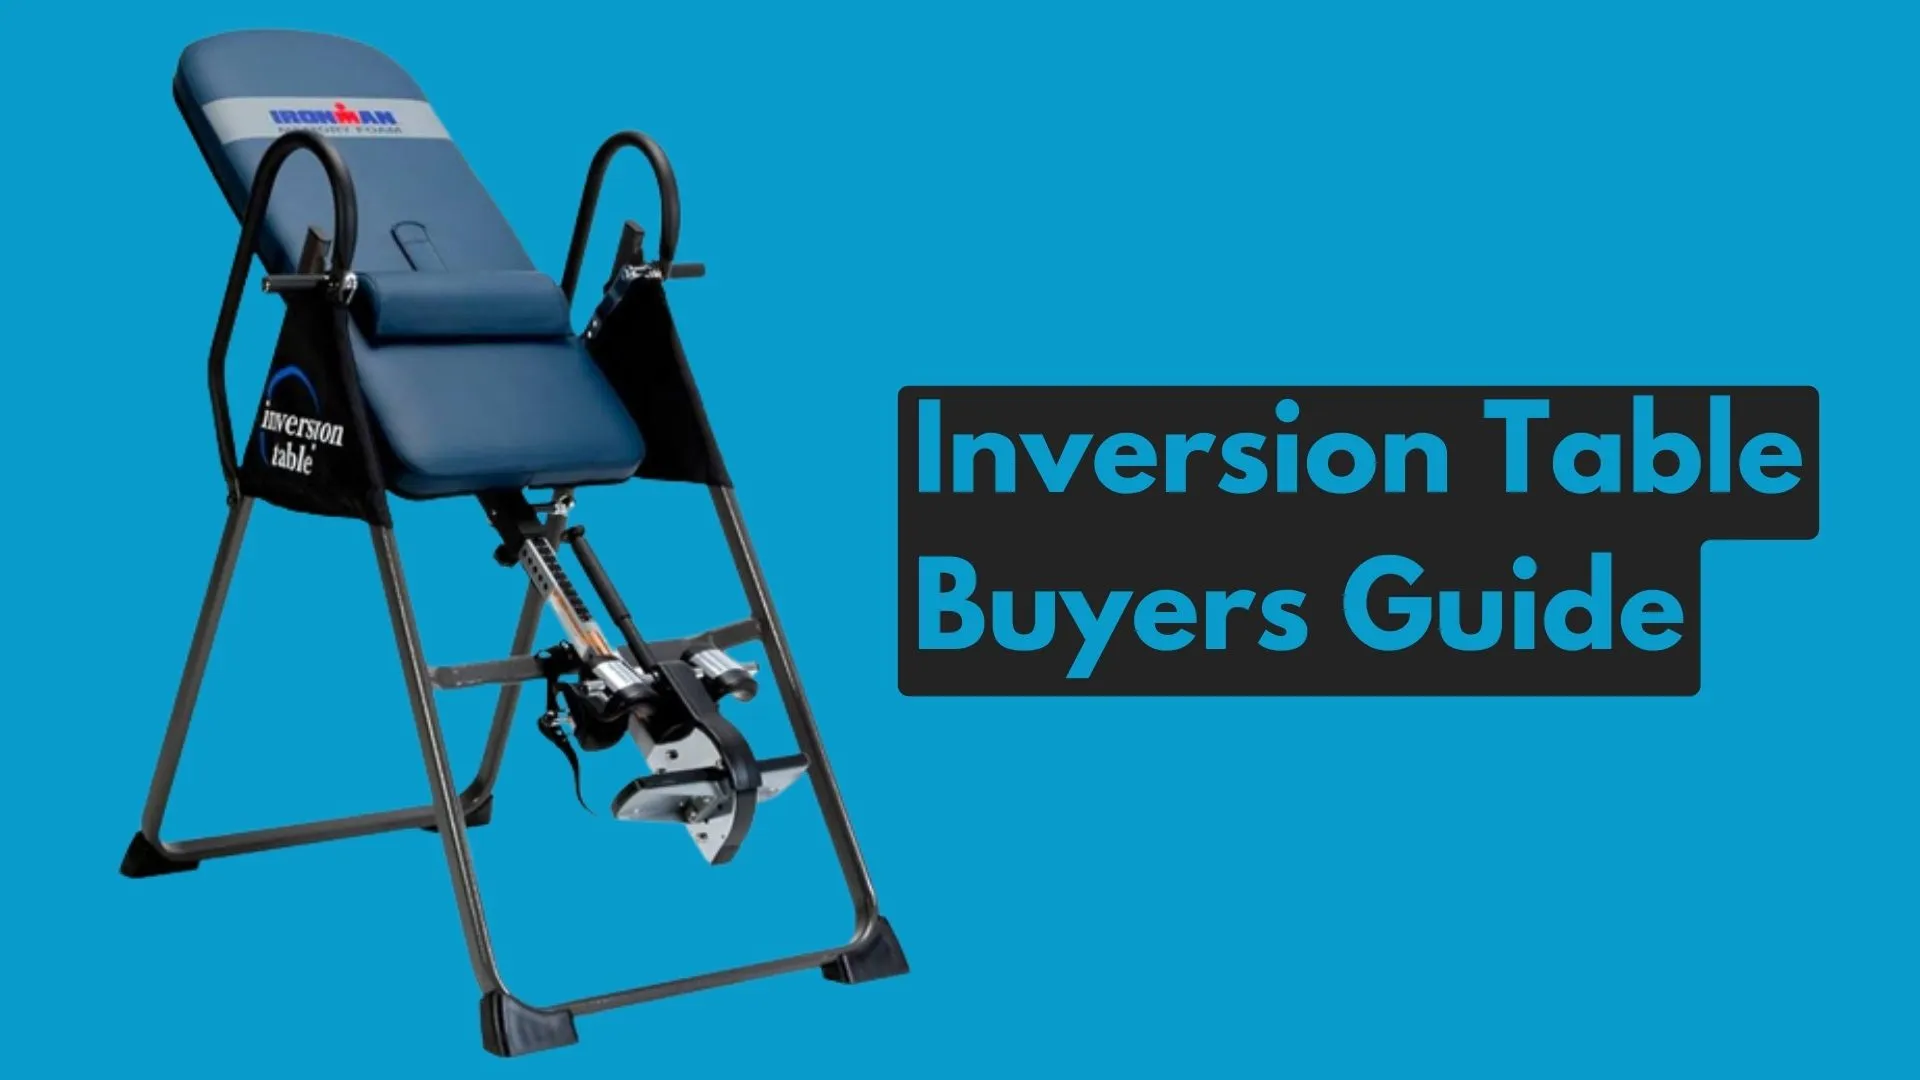 Buying Inversion Table - Read This Buyer's Guide